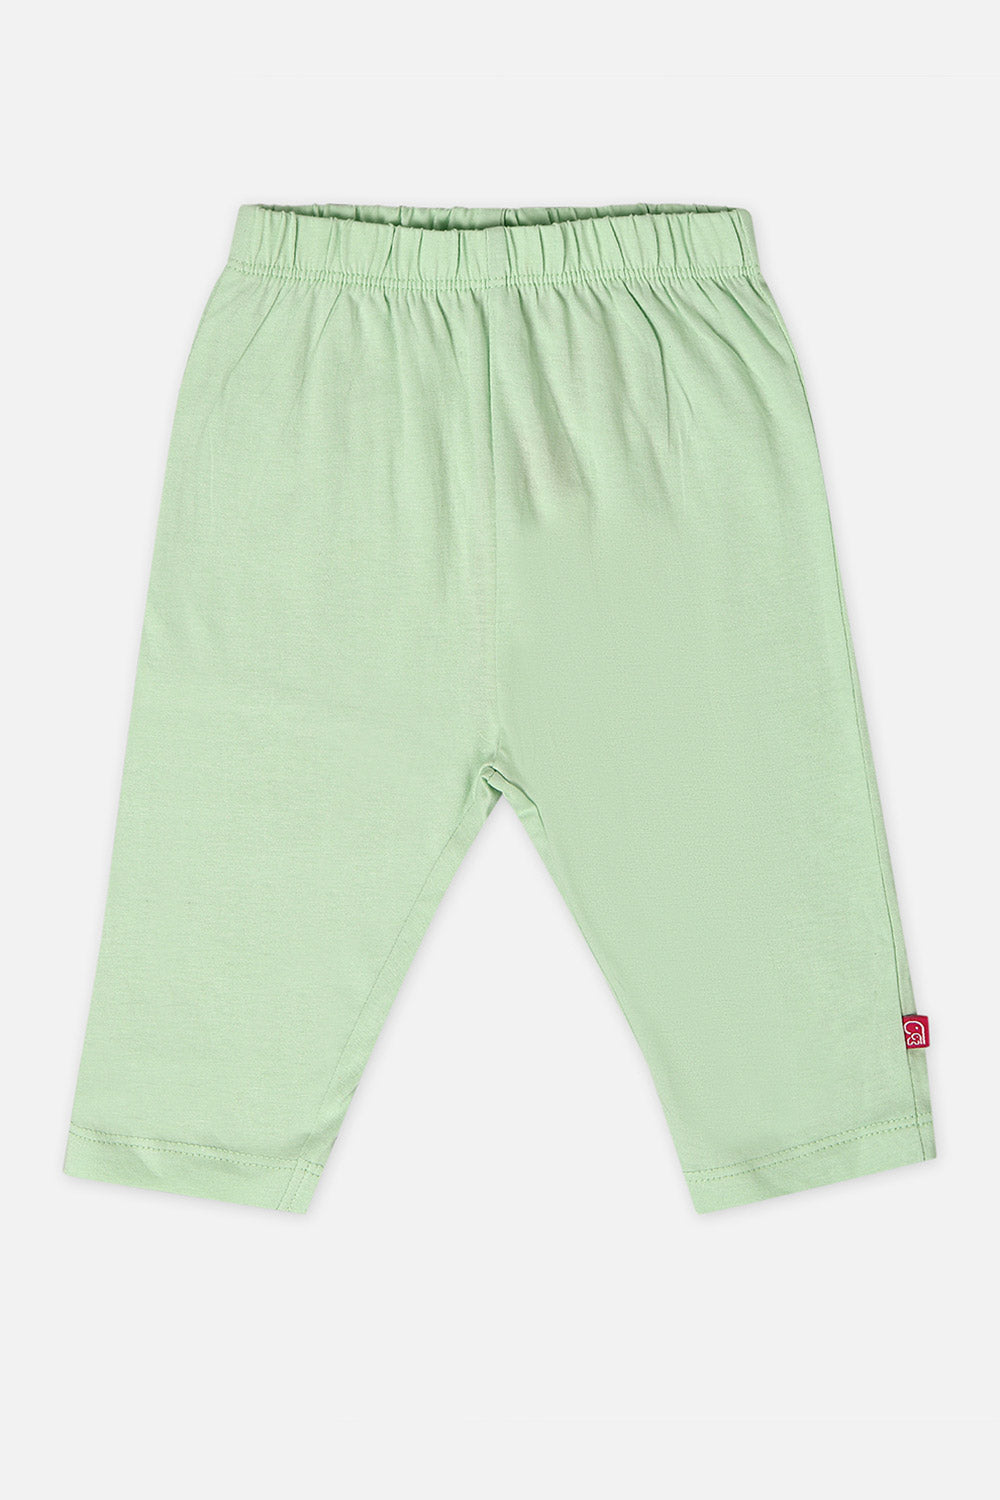 Oh Baby Comfy Pant Green-Tr07